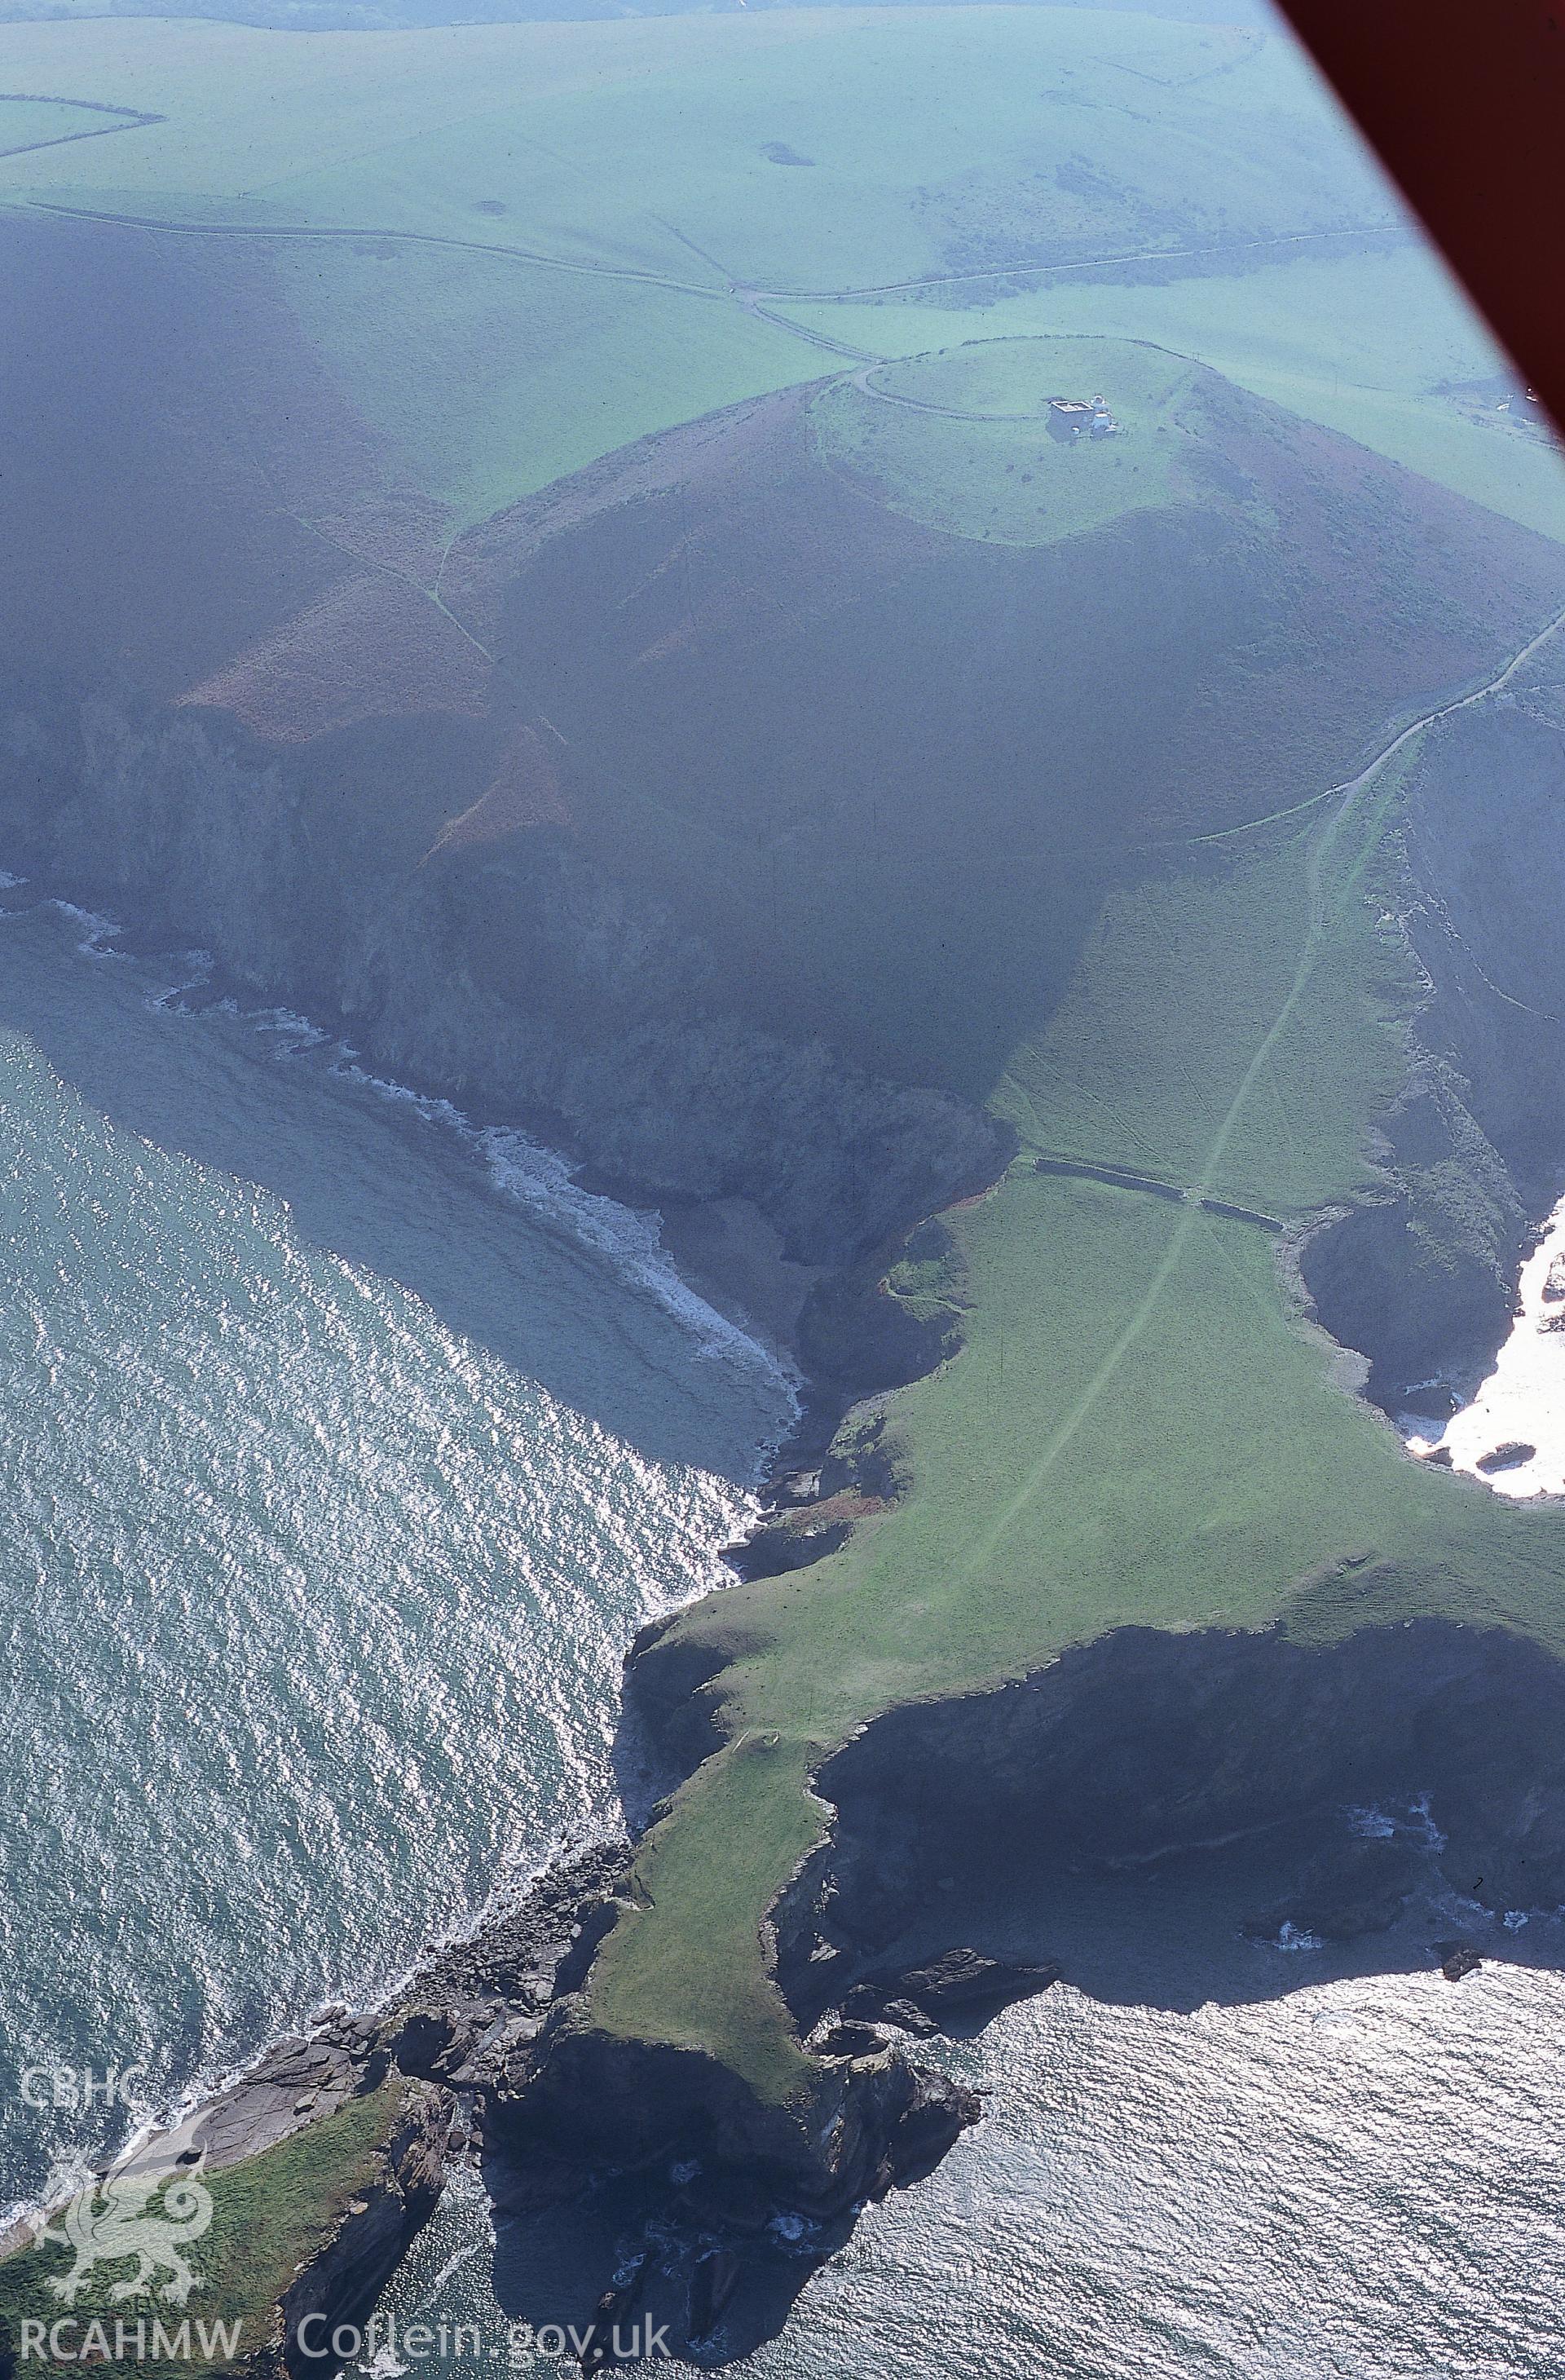 RCAHMW colour slide oblique aerial photograph of Ynys-lochtyn Cave, Llangrannog, taken on 19/10/1999 by Toby Driver